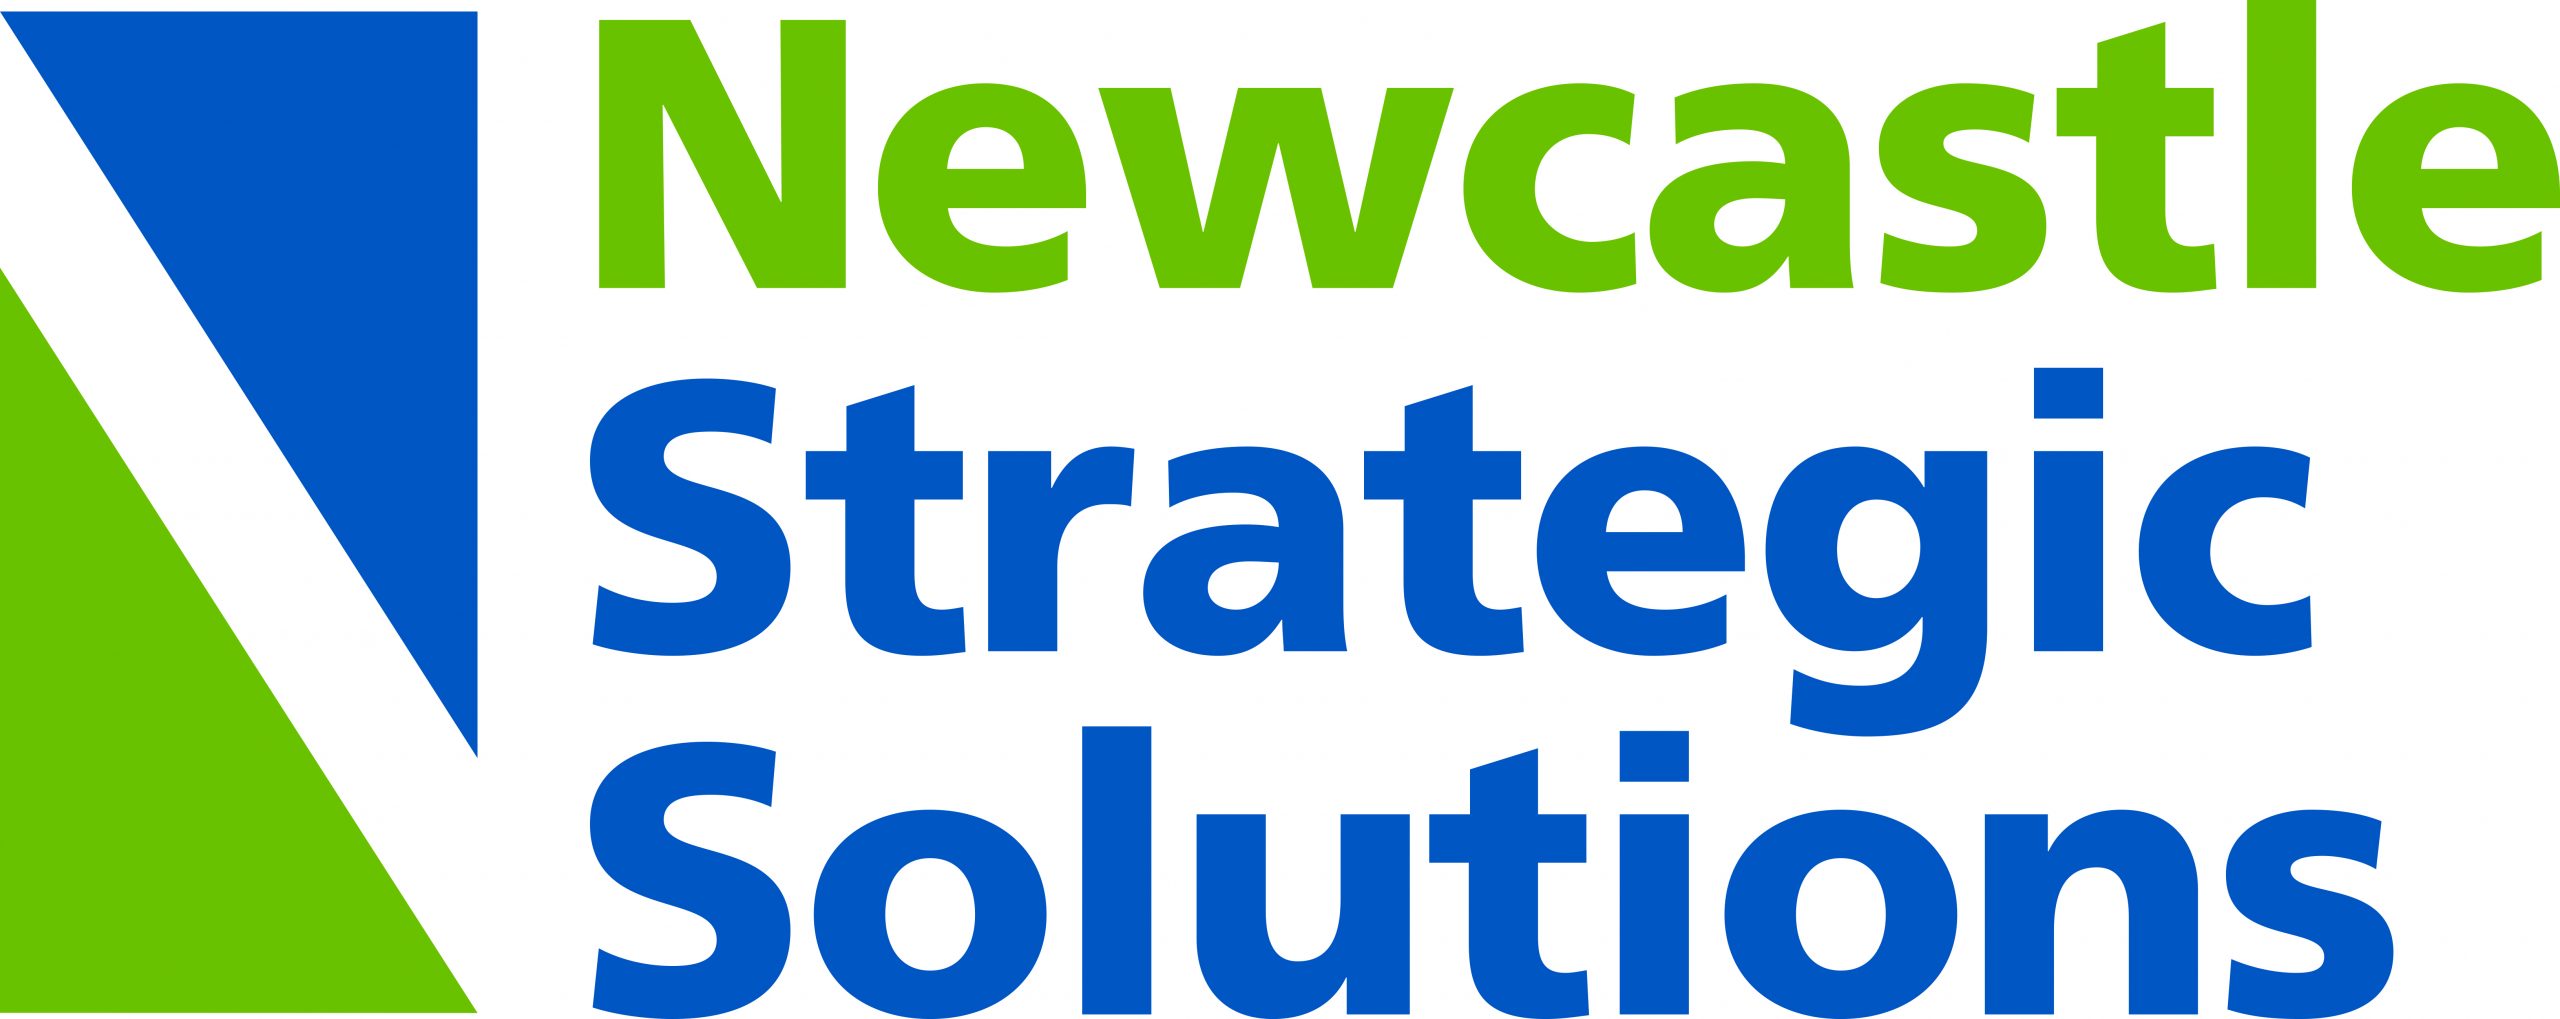 FinTech North and Newcastle Strategic Solutions to Partner for Third Year